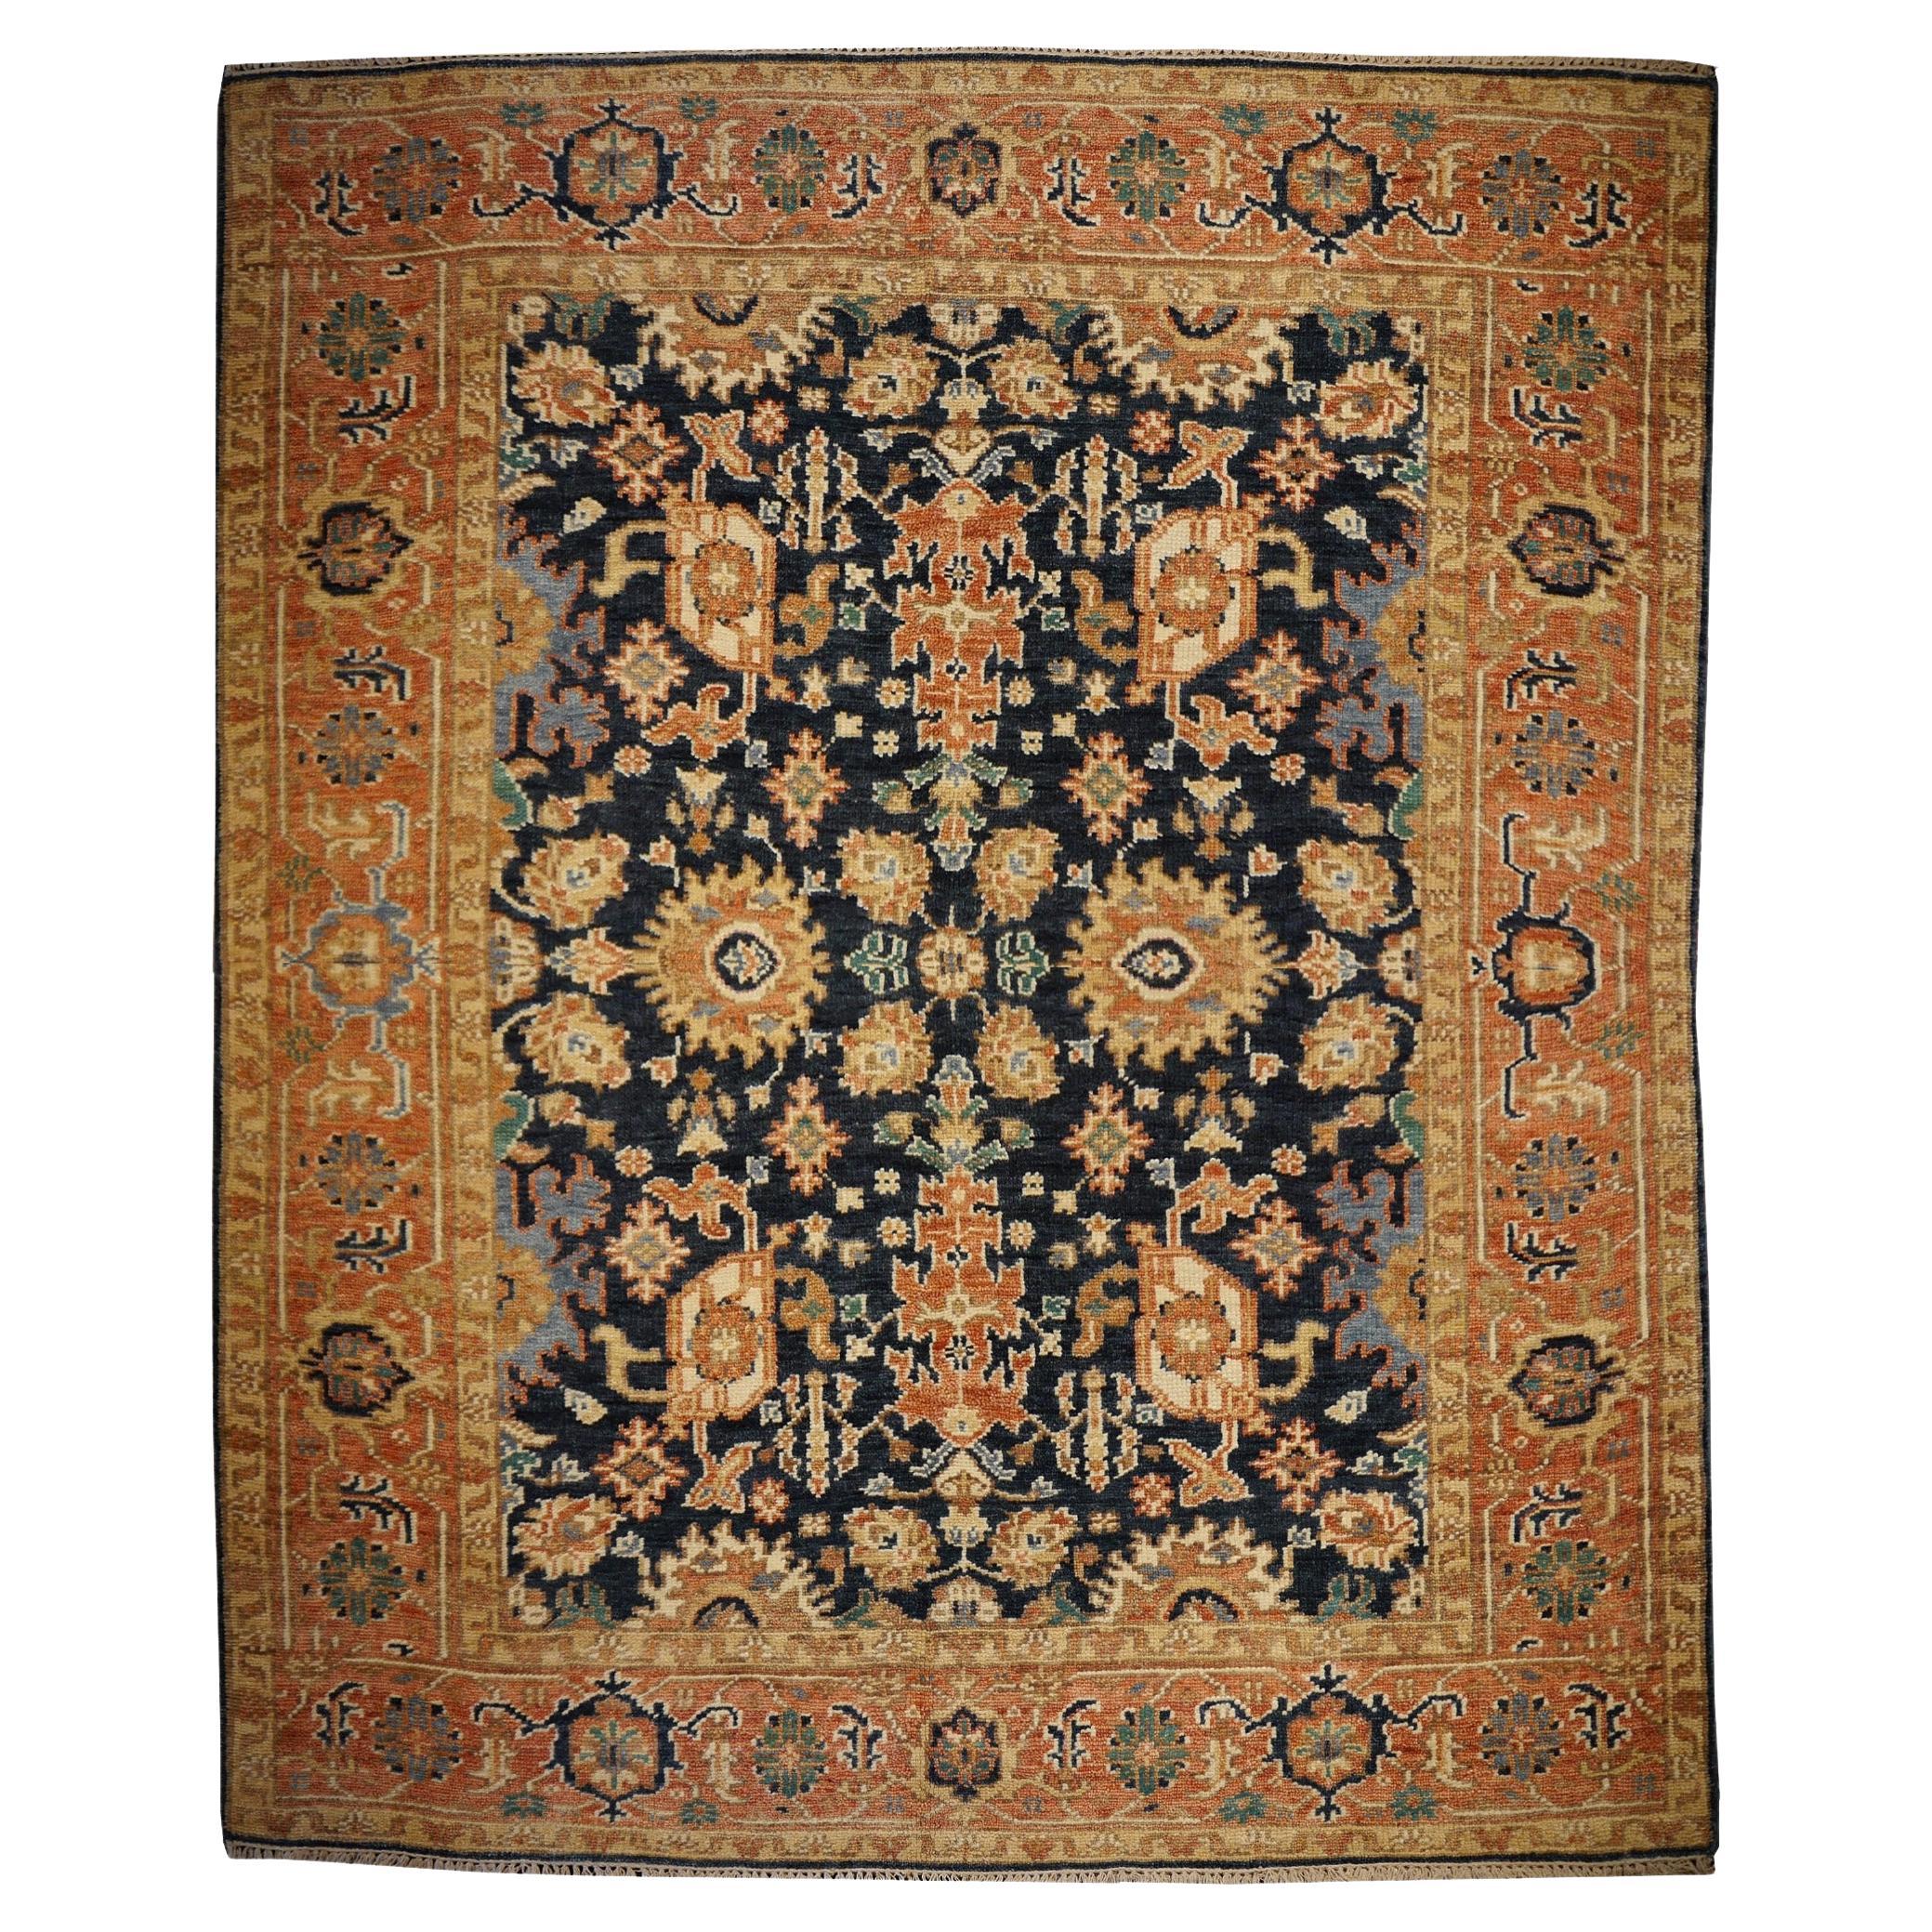 Heriz Rug Hand Knotted Low Wool Pile Vintage Look Djoharian Collection